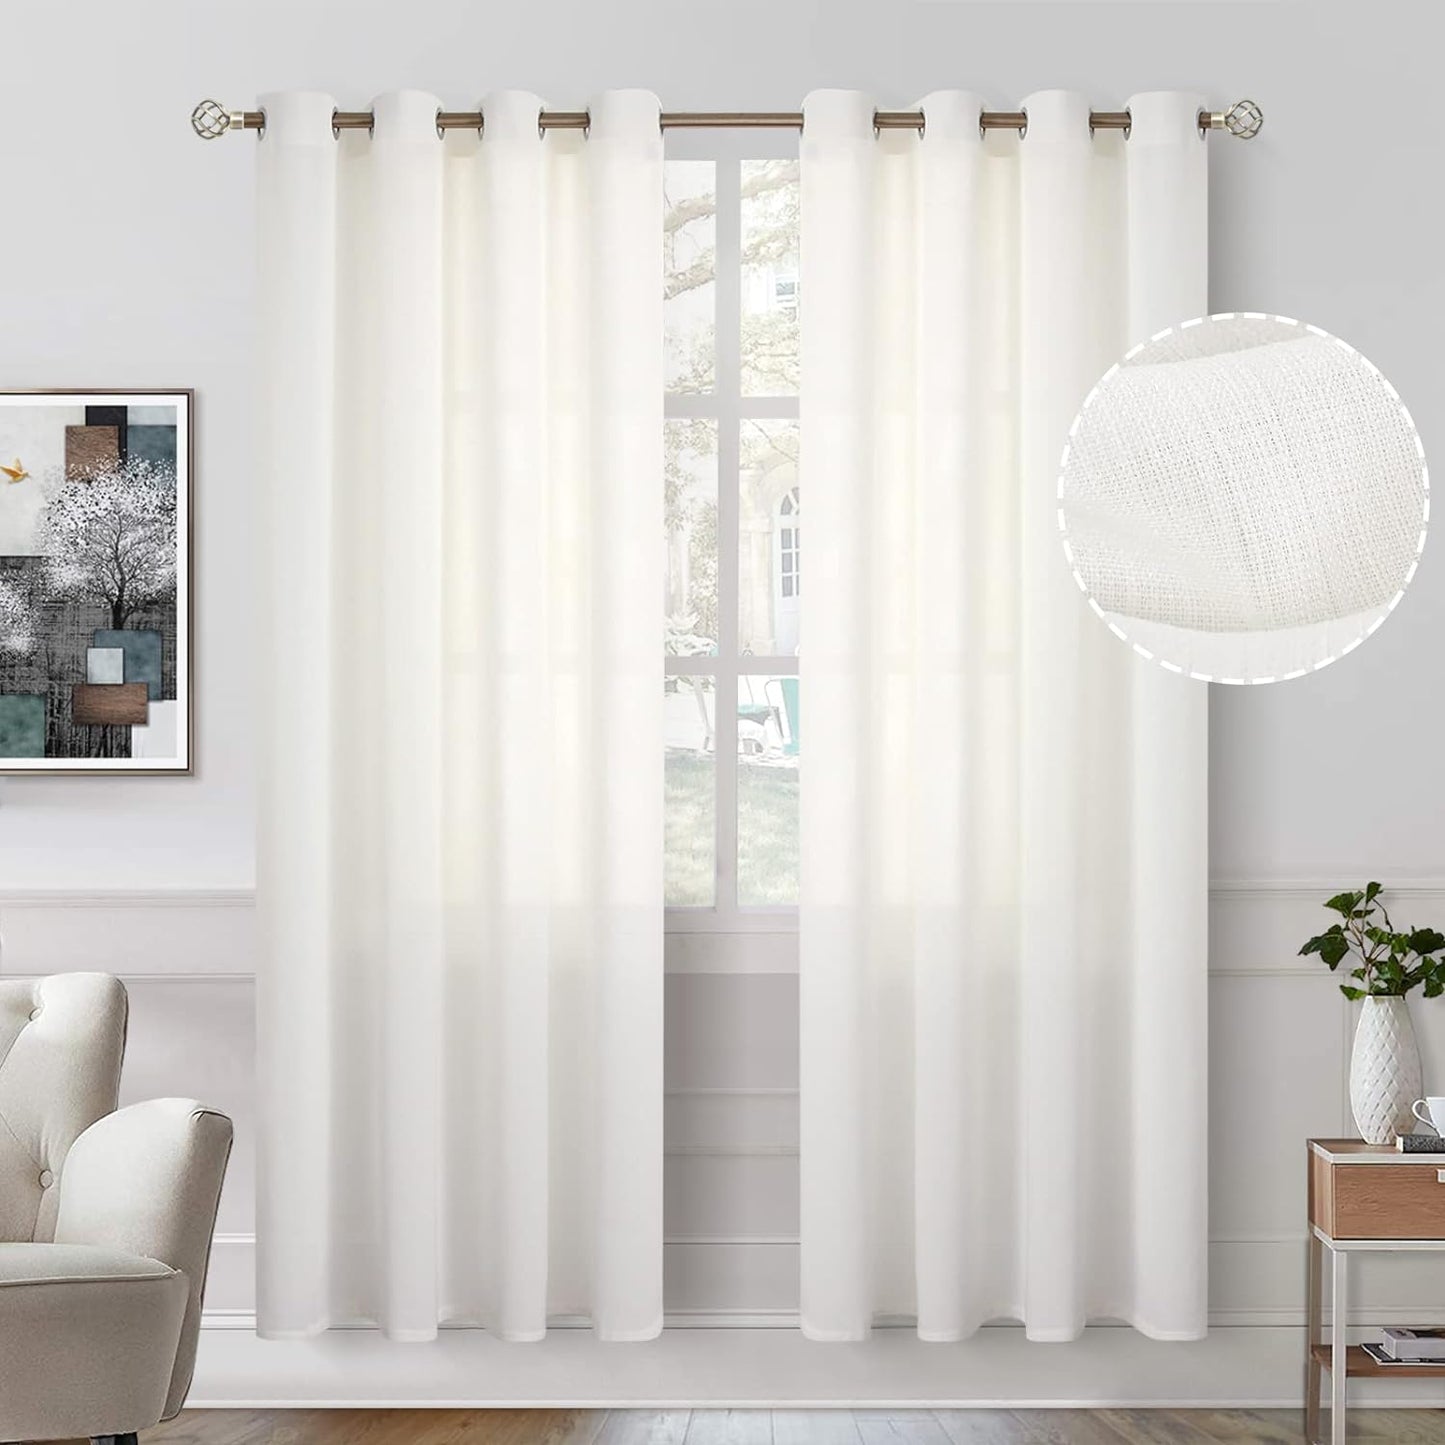 Bgment Natural Linen Look Semi Sheer Curtains for Bedroom, 52 X 54 Inch White Grommet Light Filtering Casual Textured Privacy Curtains for Bay Window, 2 Panels  BGment Ivory Cream 52W X 72L 